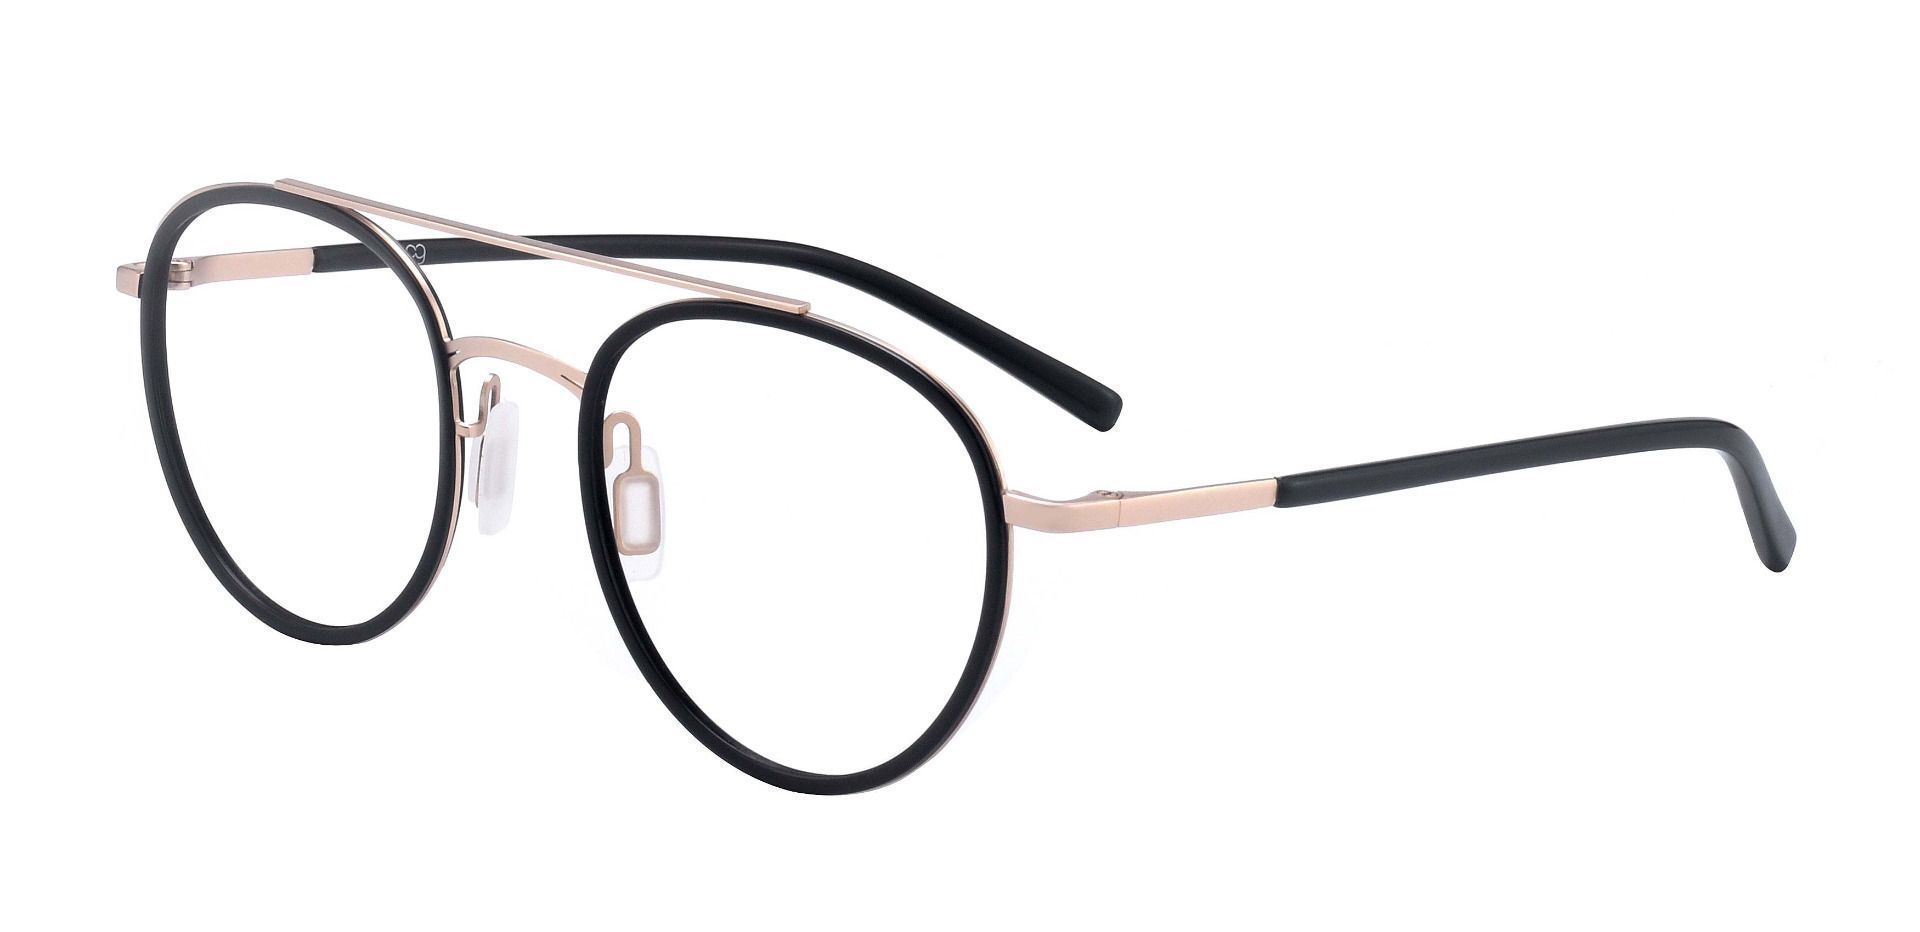 Alistair Aviator Non-Rx Glasses - Black/light Brushed Gold